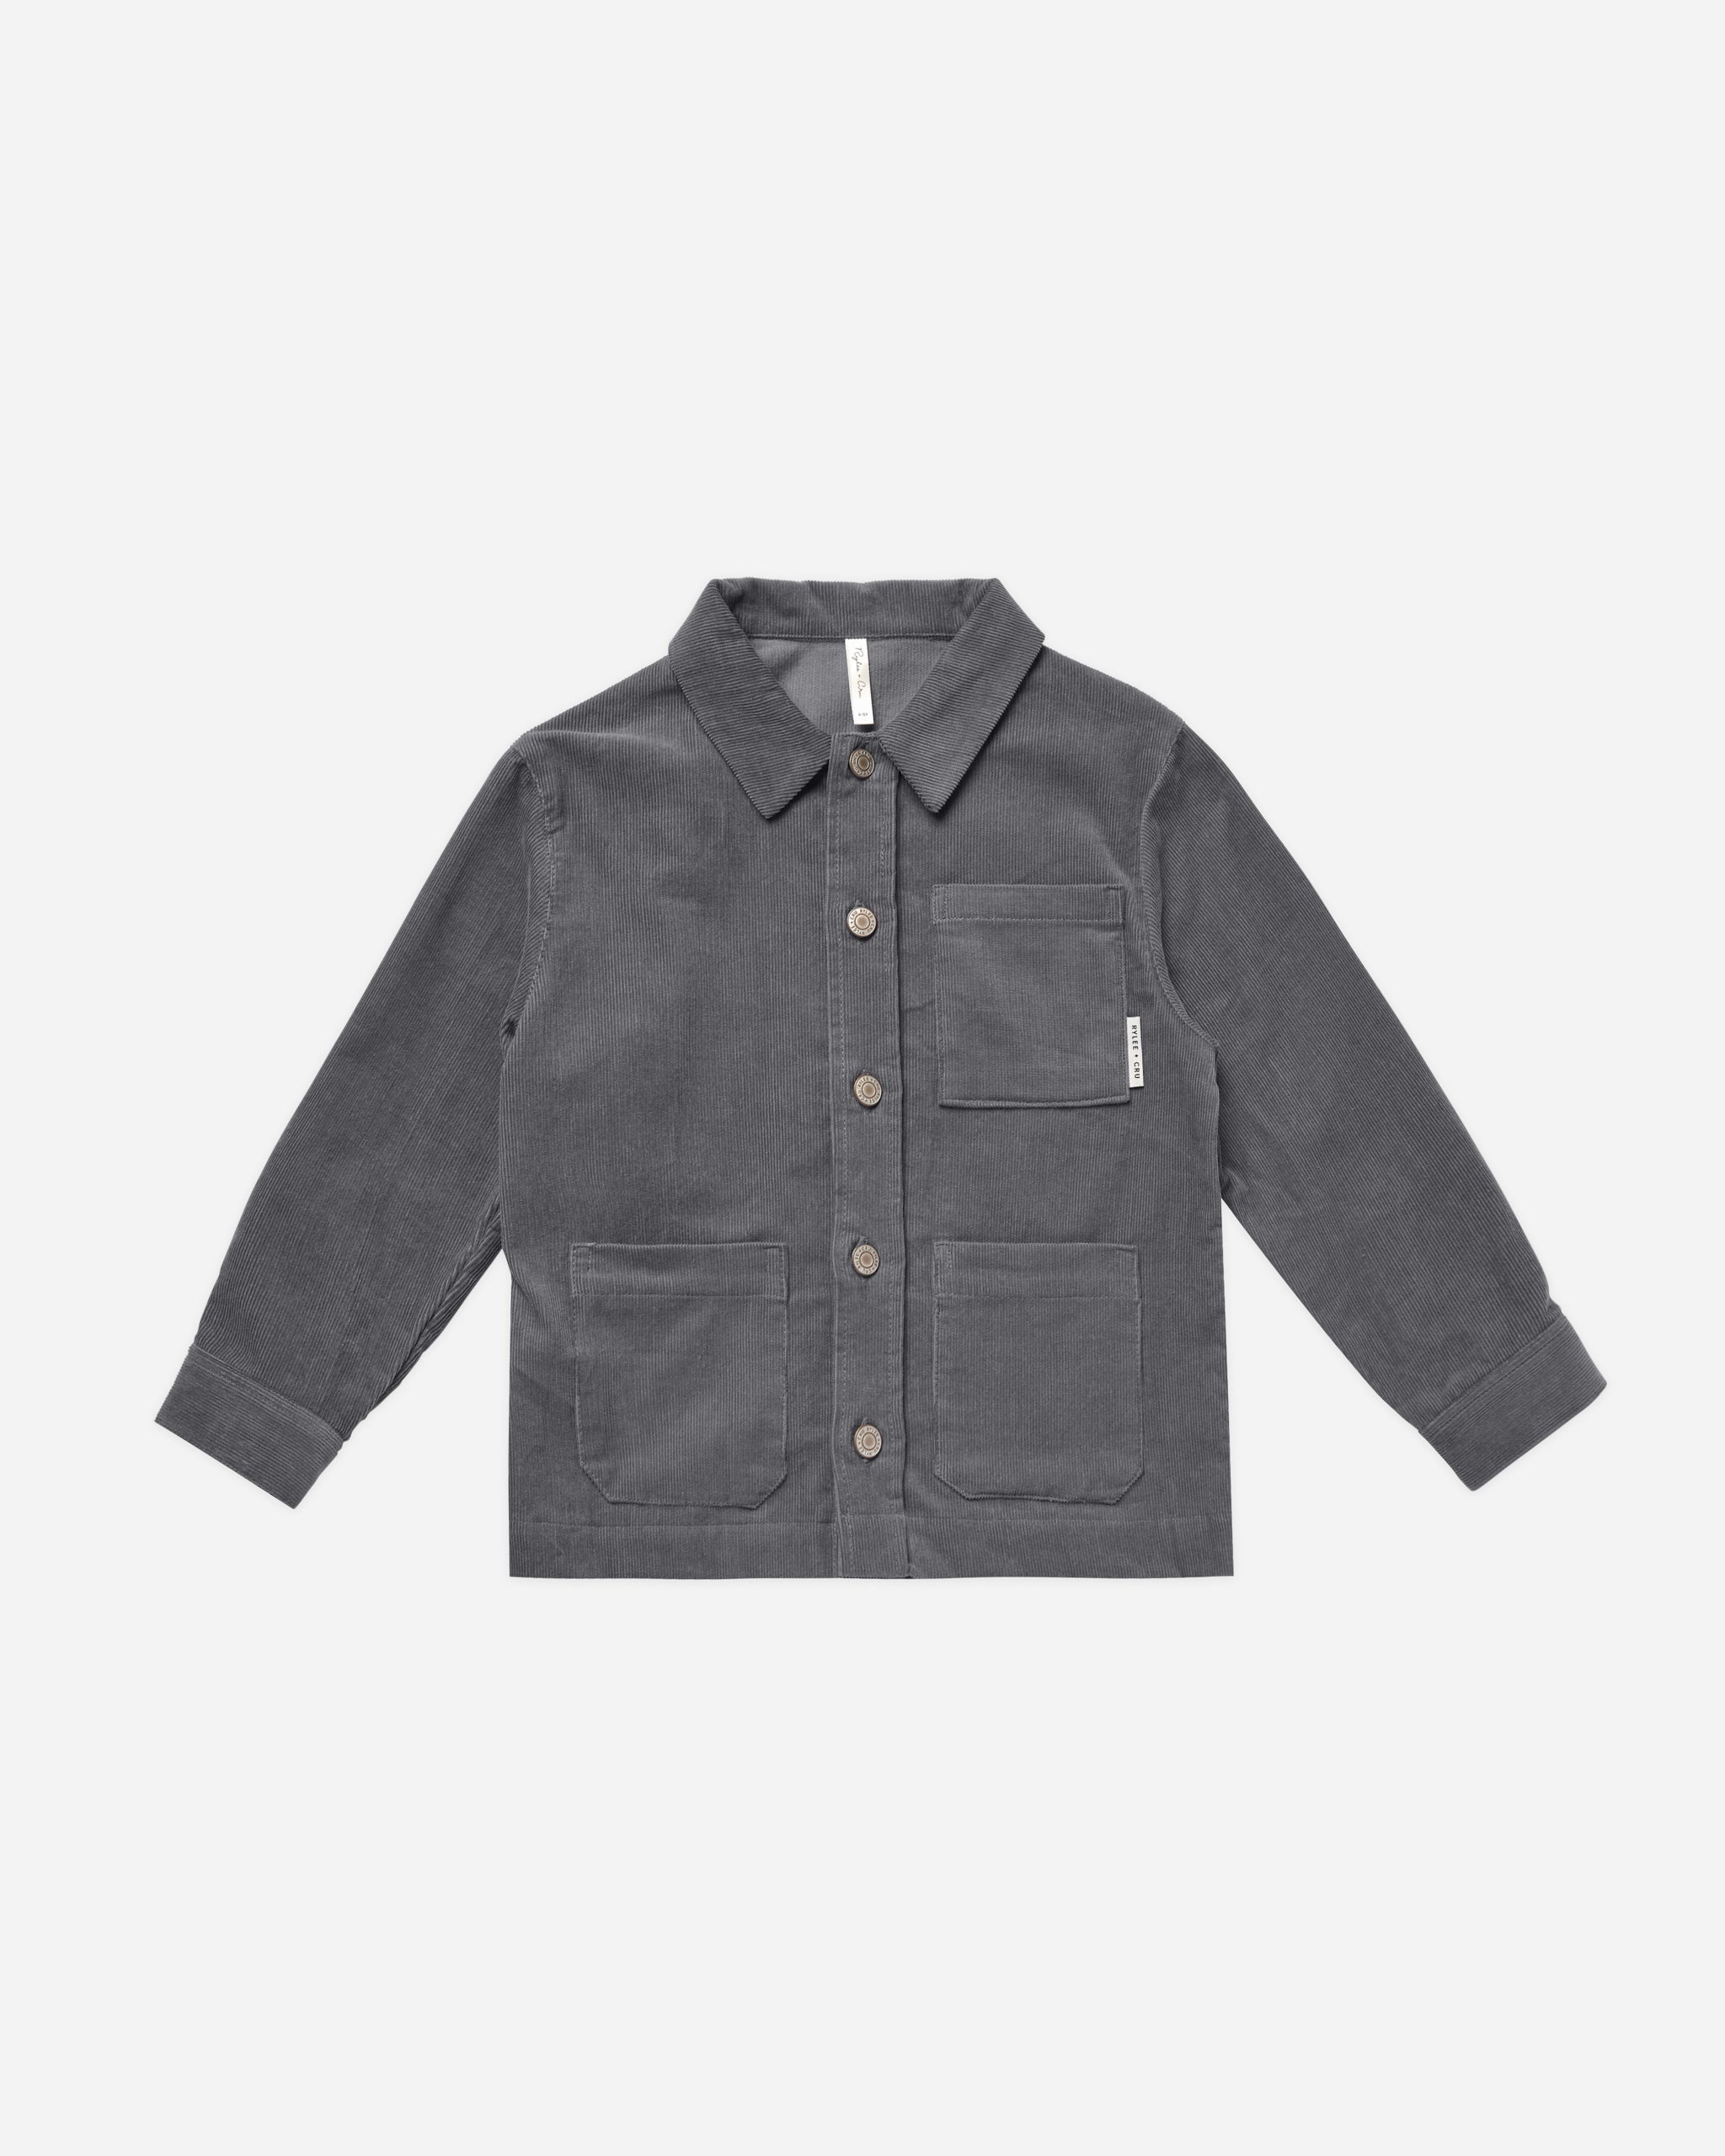 Cord Overshirt || Slate - Rylee + Cru | Kids Clothes | Trendy Baby Clothes | Modern Infant Outfits |